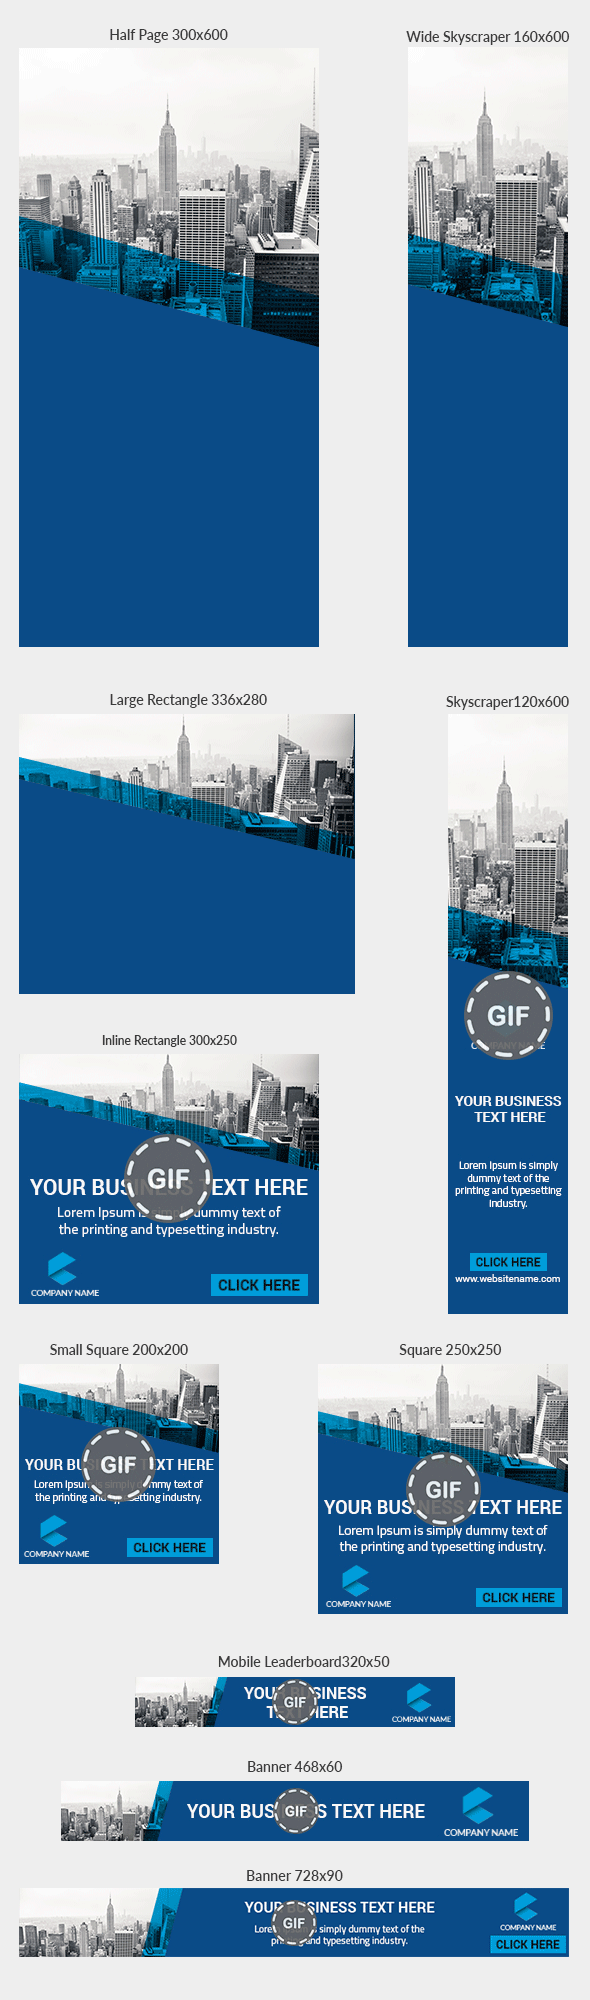 corporate gif animated banner pinterest banners banner template medium